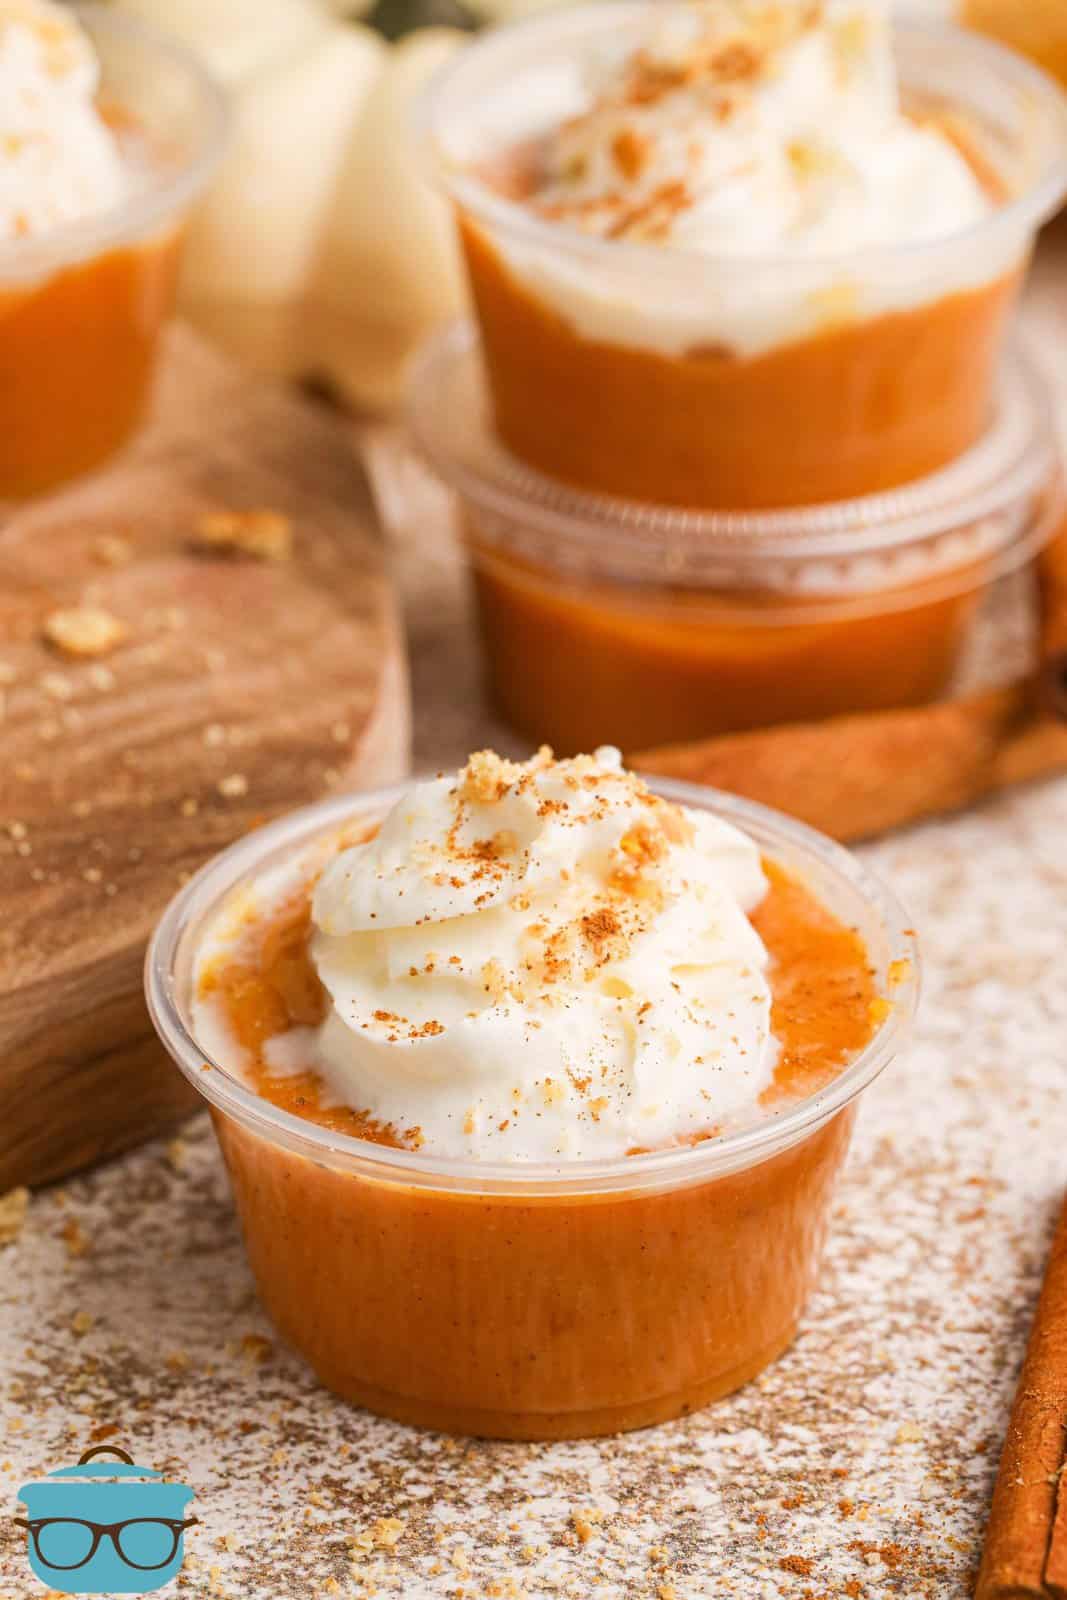 A few pumpkin pie shots with whipped cream and ground cinnamon.